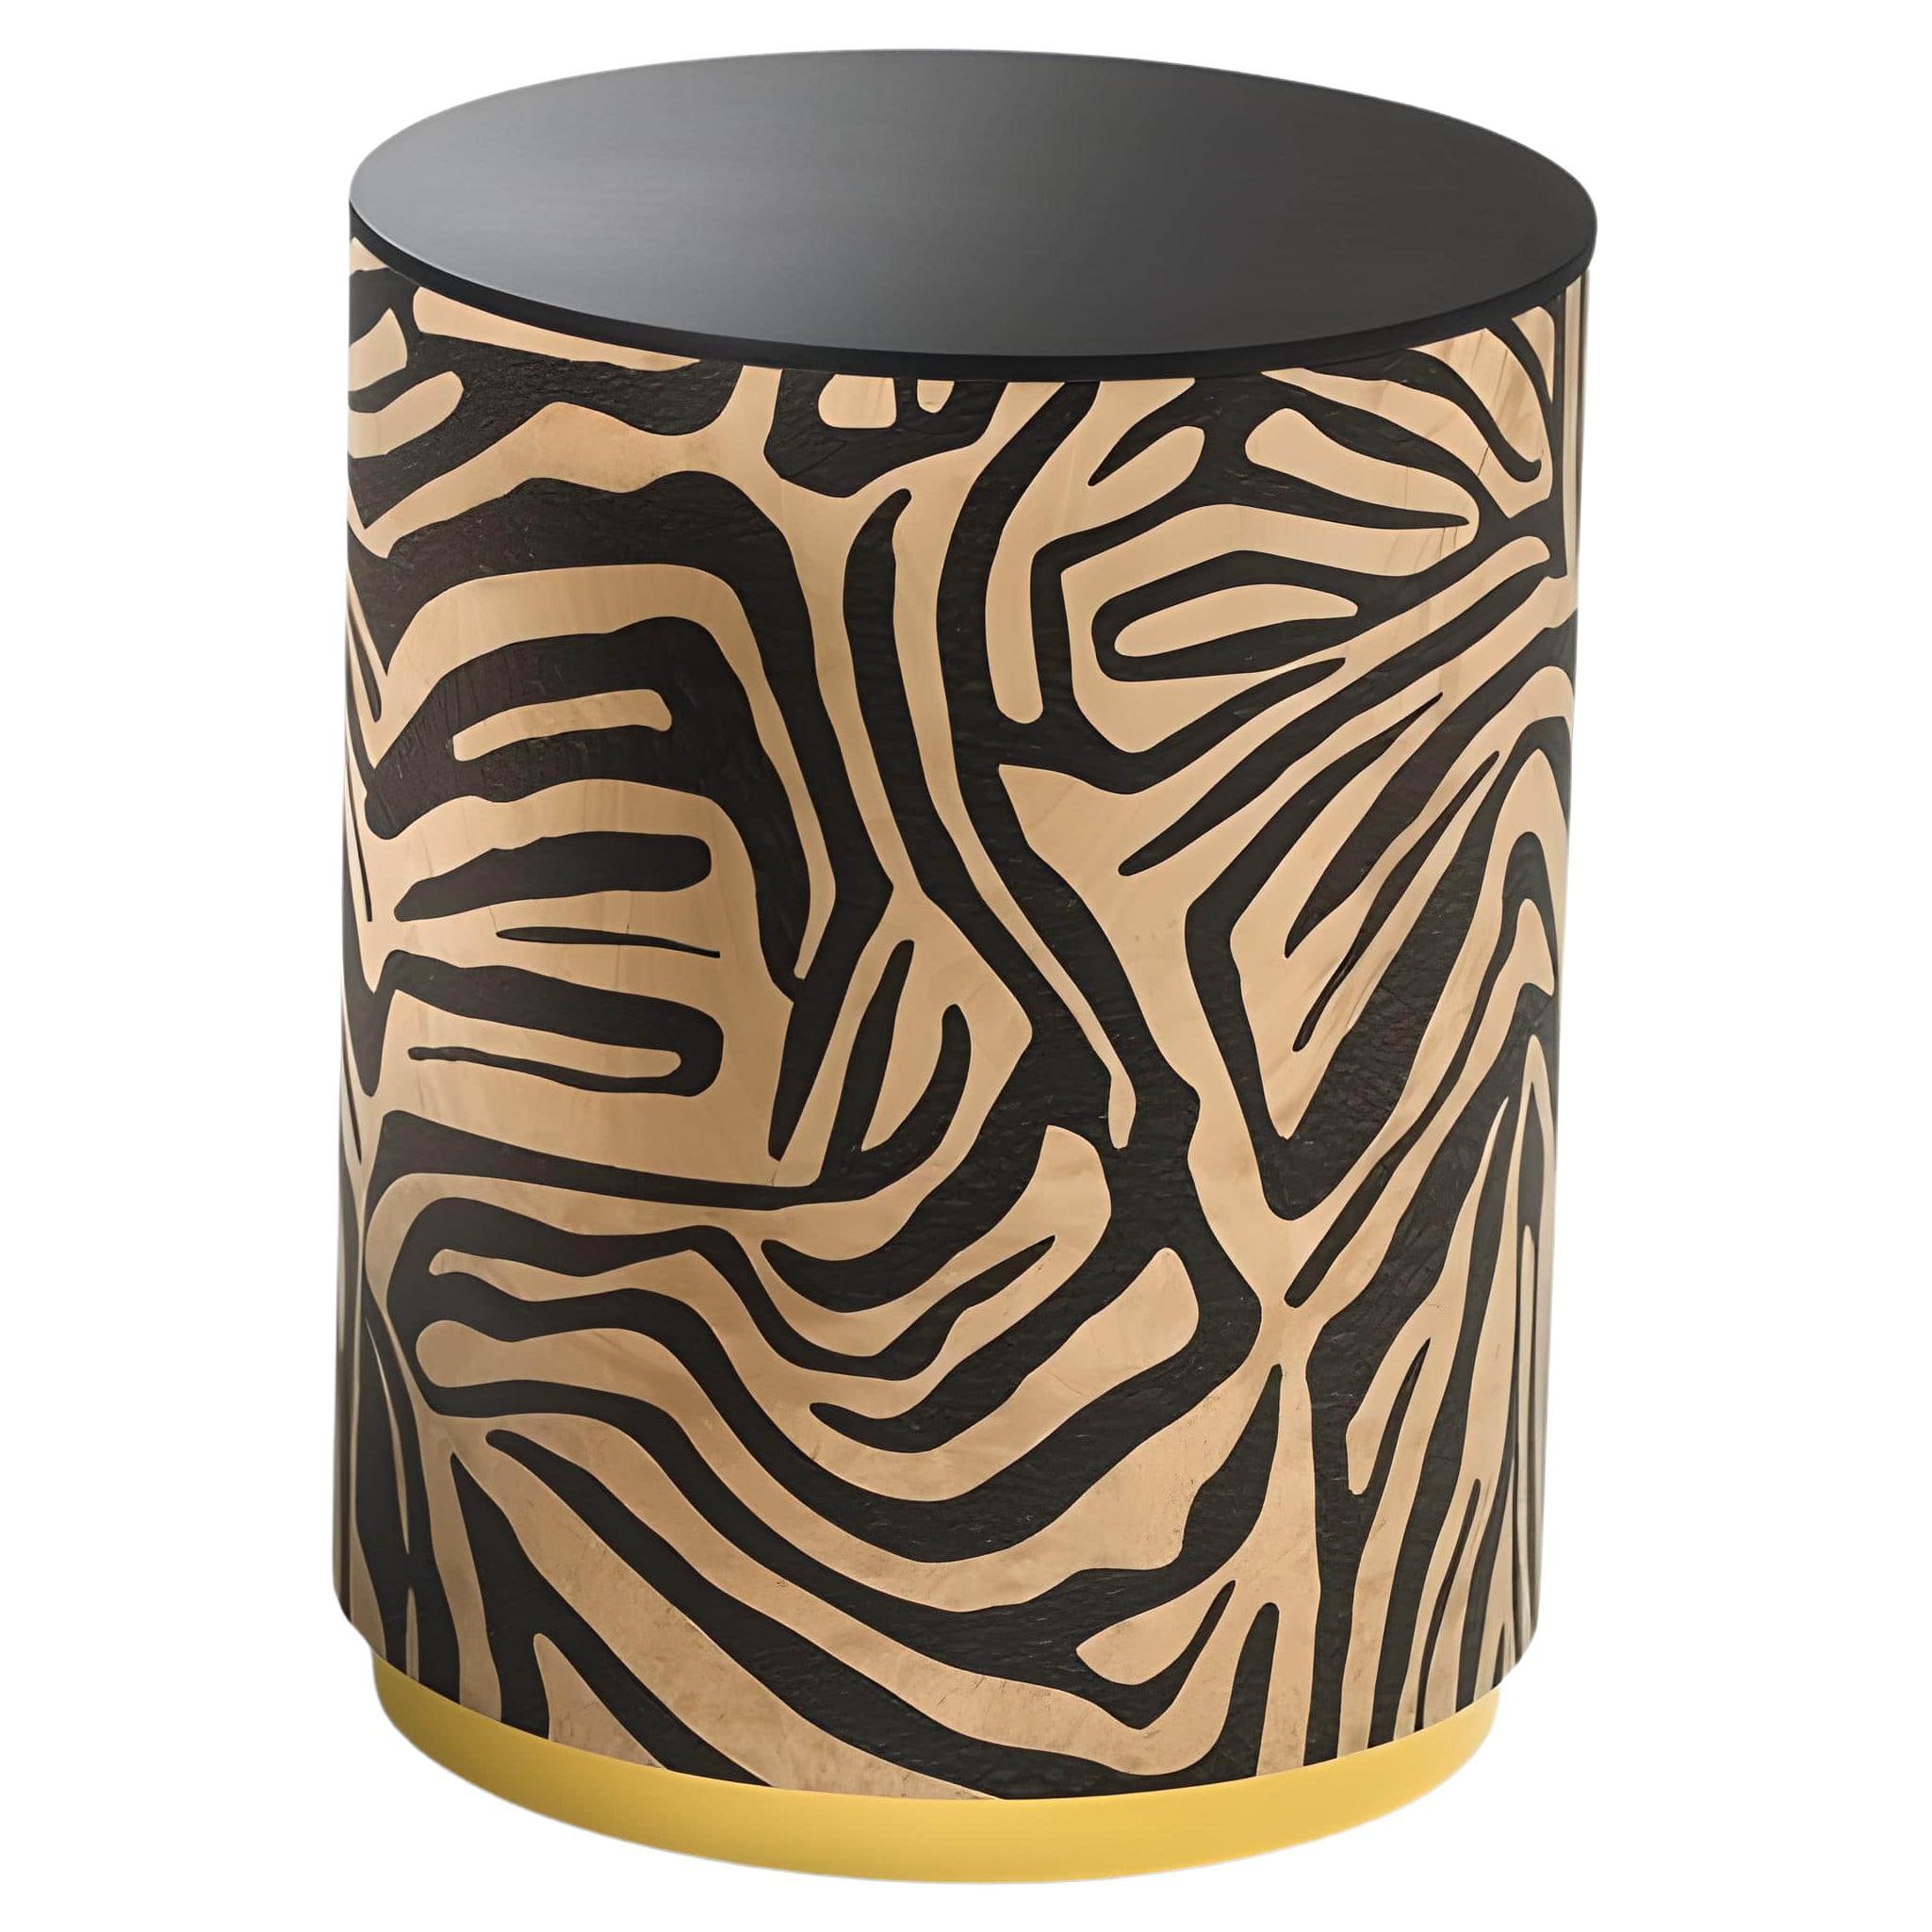 Triboo Zebra B Stool in American Walnut and Lacquered top